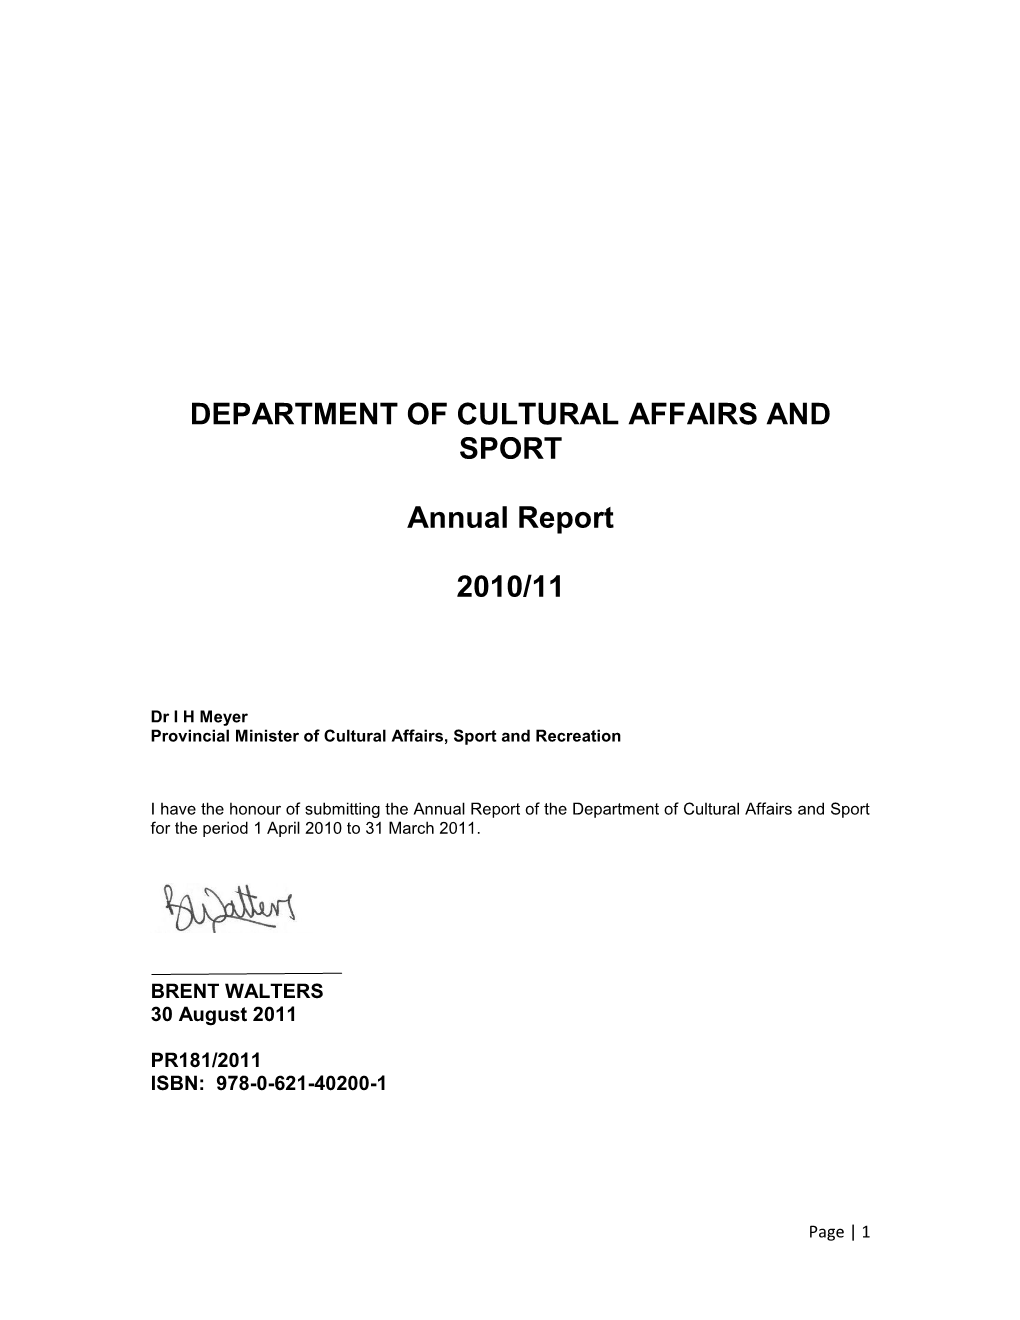 DEPARTMENT of CULTURAL AFFAIRS and SPORT Annual